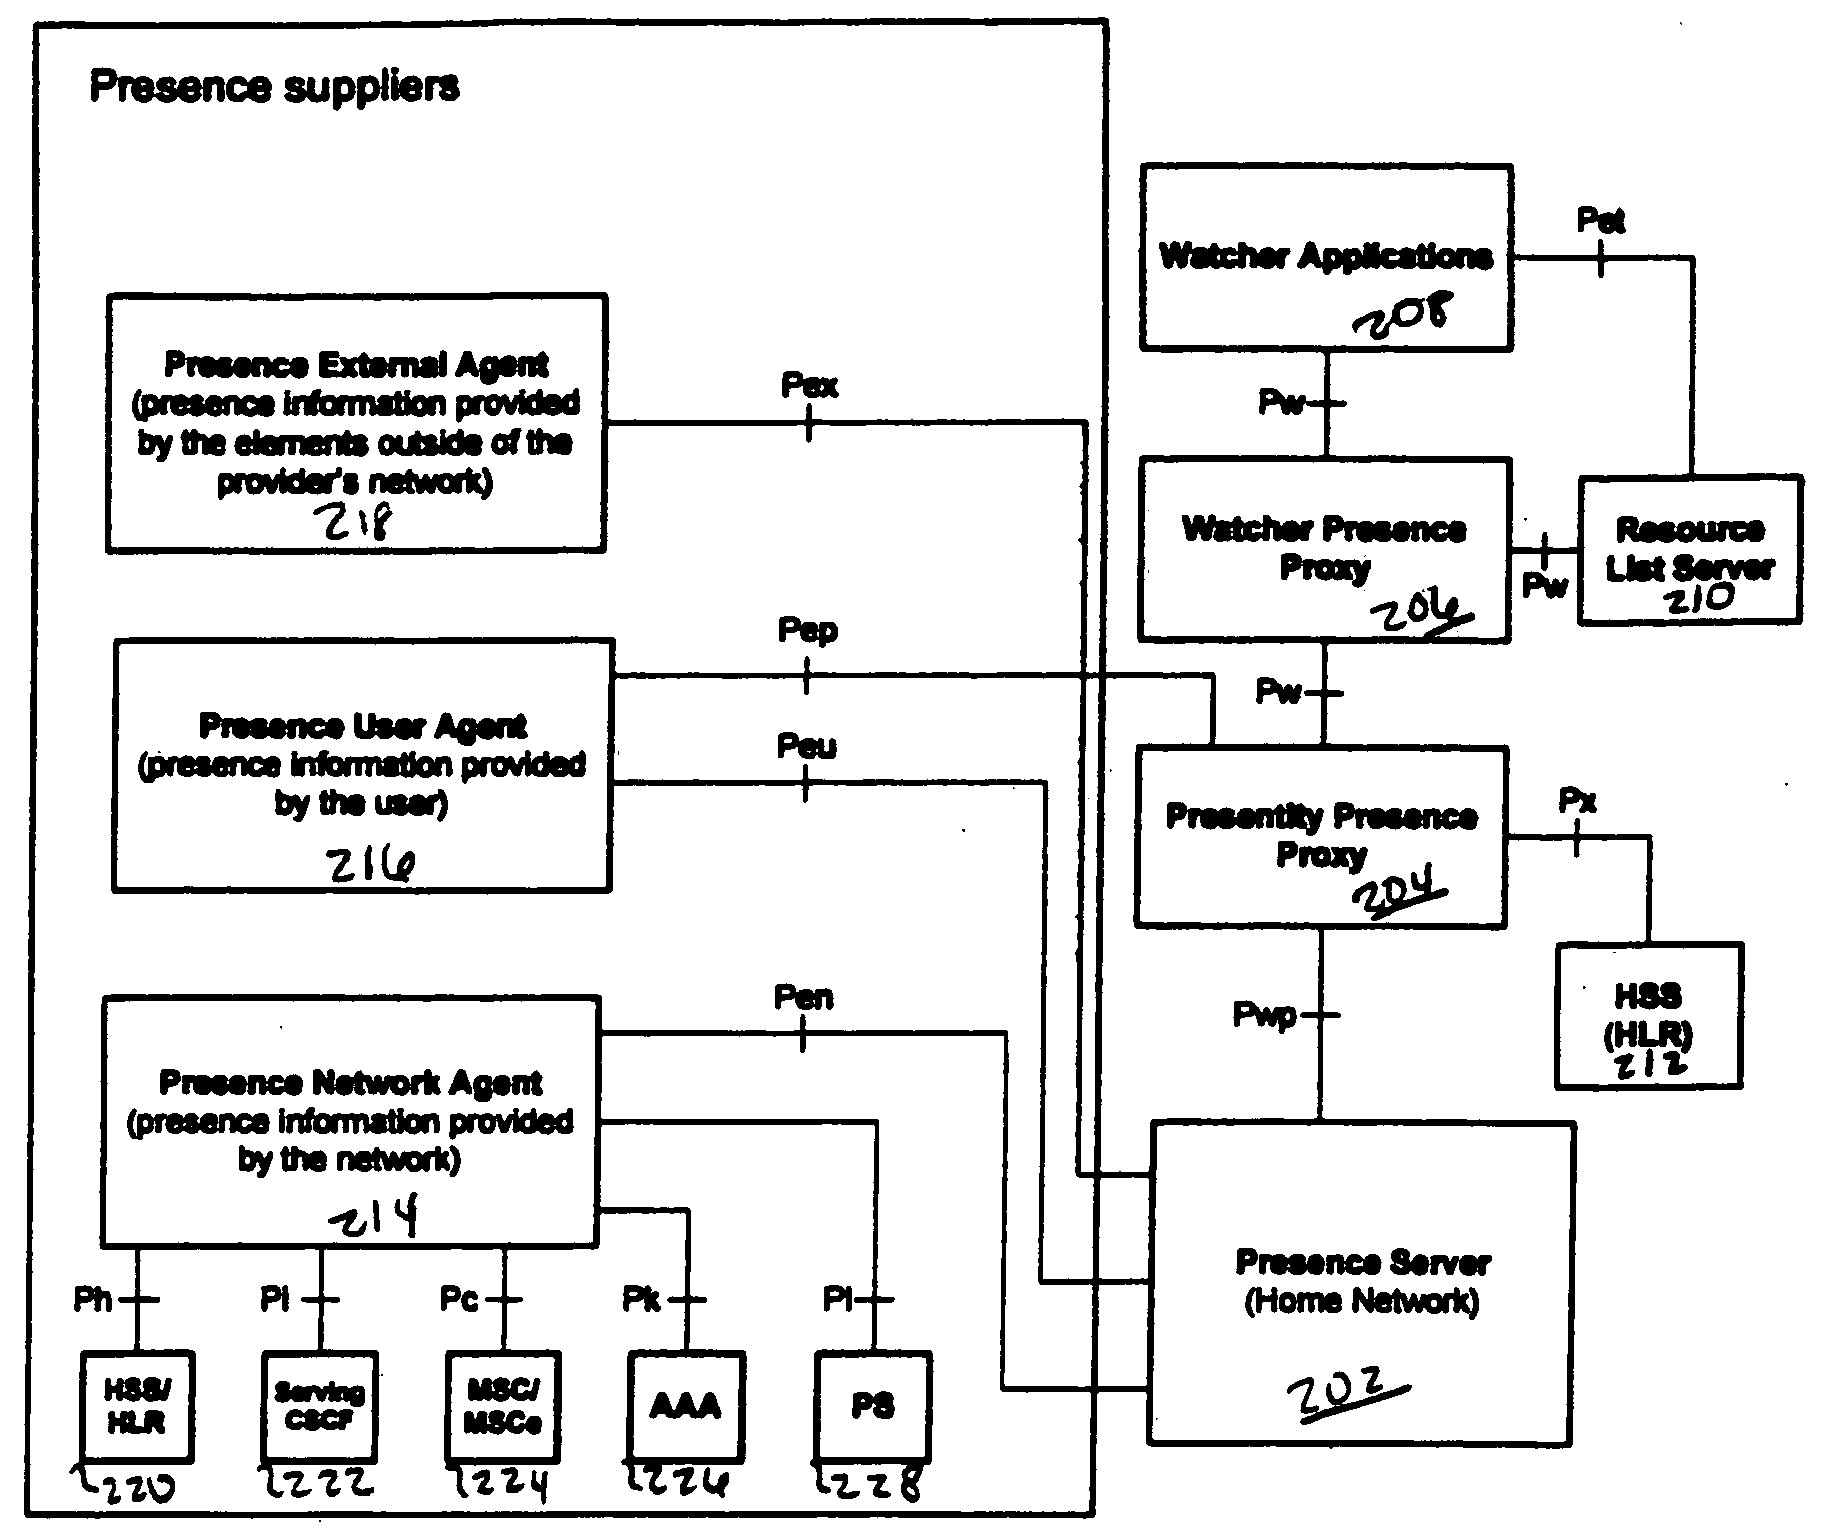 Representing network availability status information in presence information